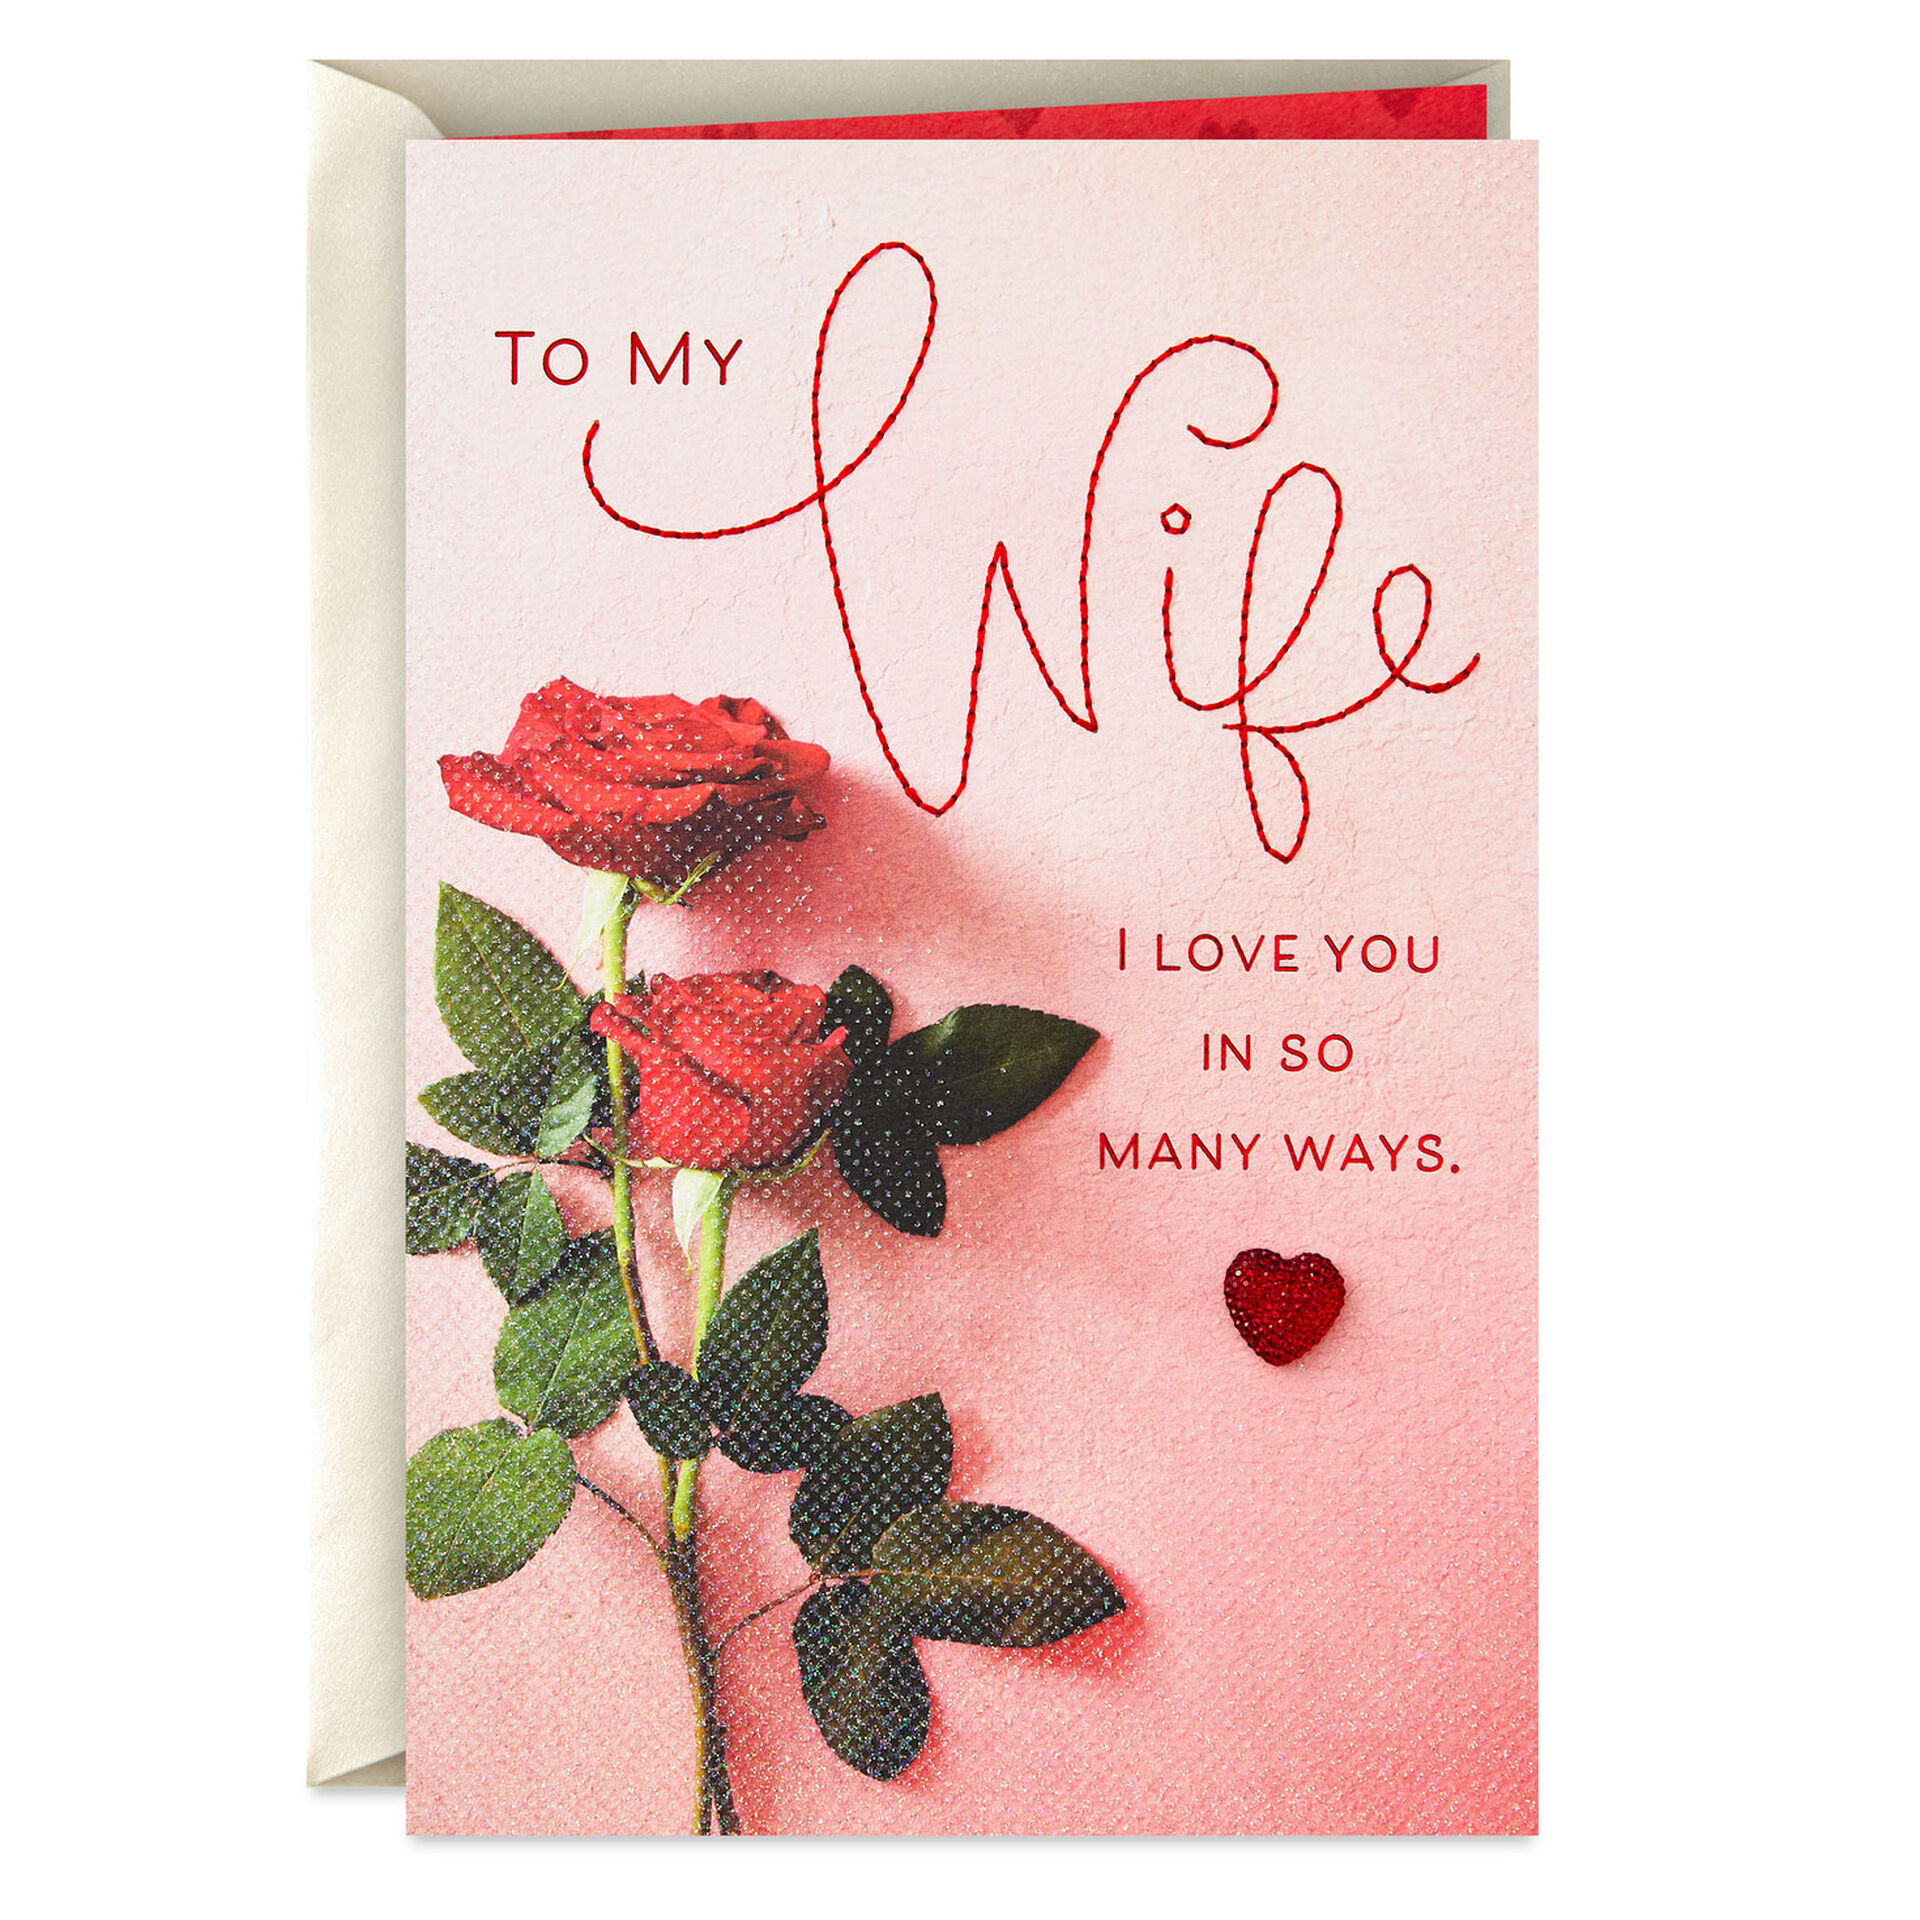 love-you-in-so-many-ways-valentine-s-day-card-for-wife-greeting-cards-hallmark